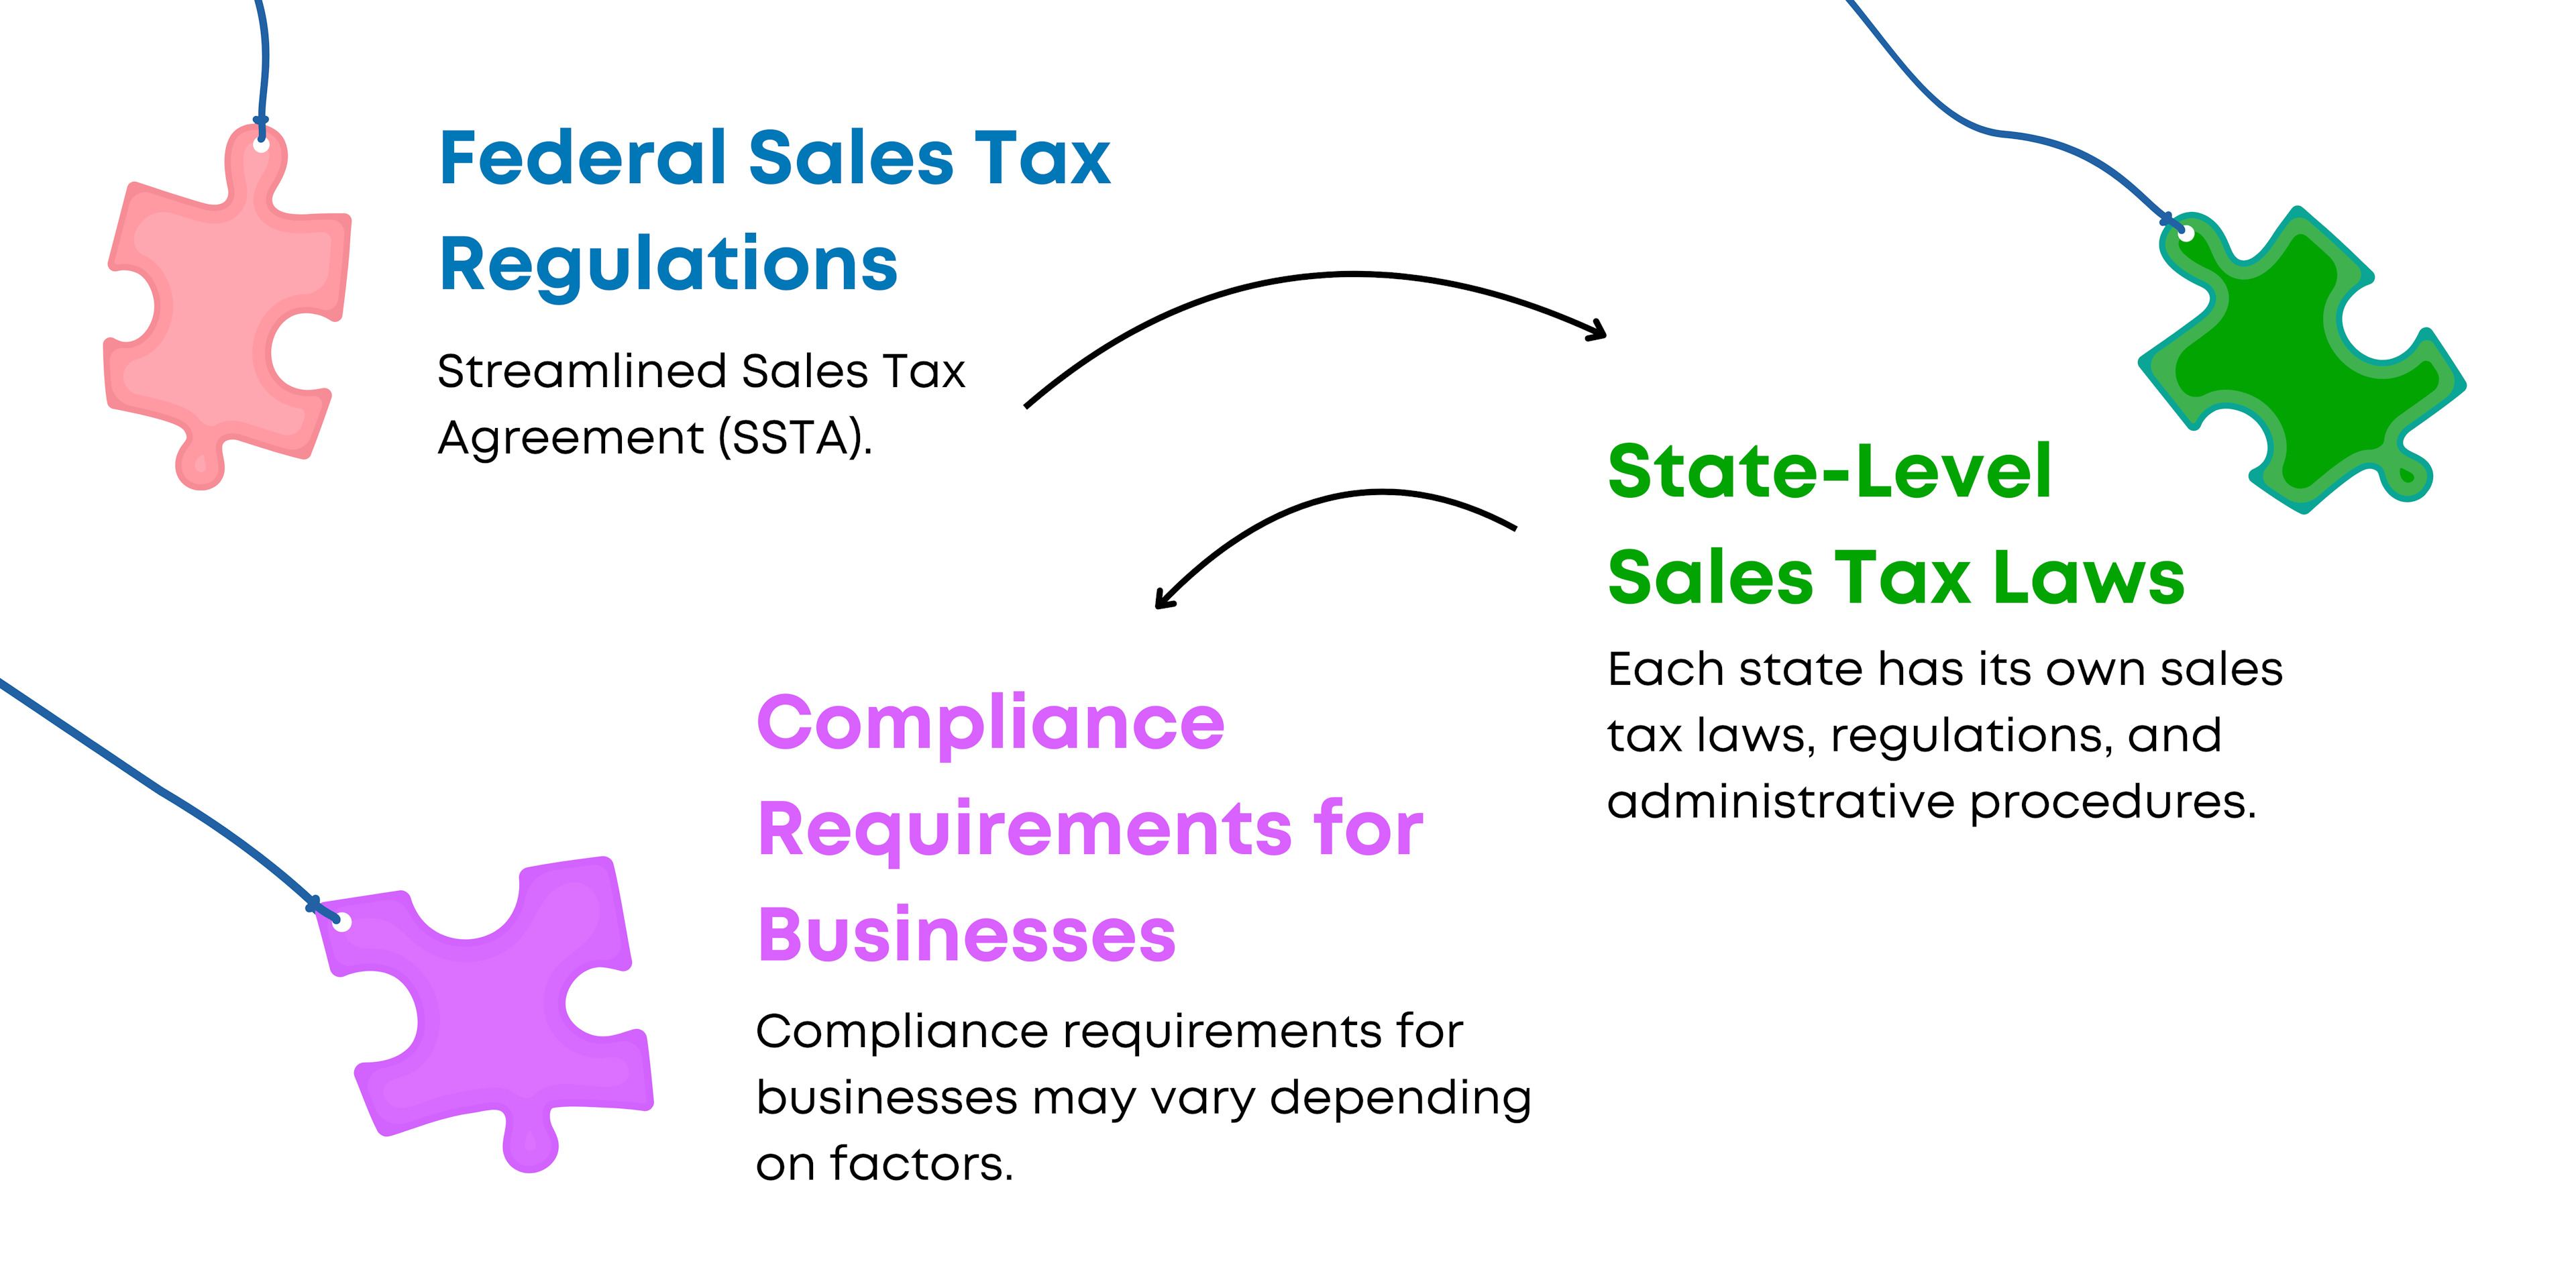 Sales Tax Laws and Regulations